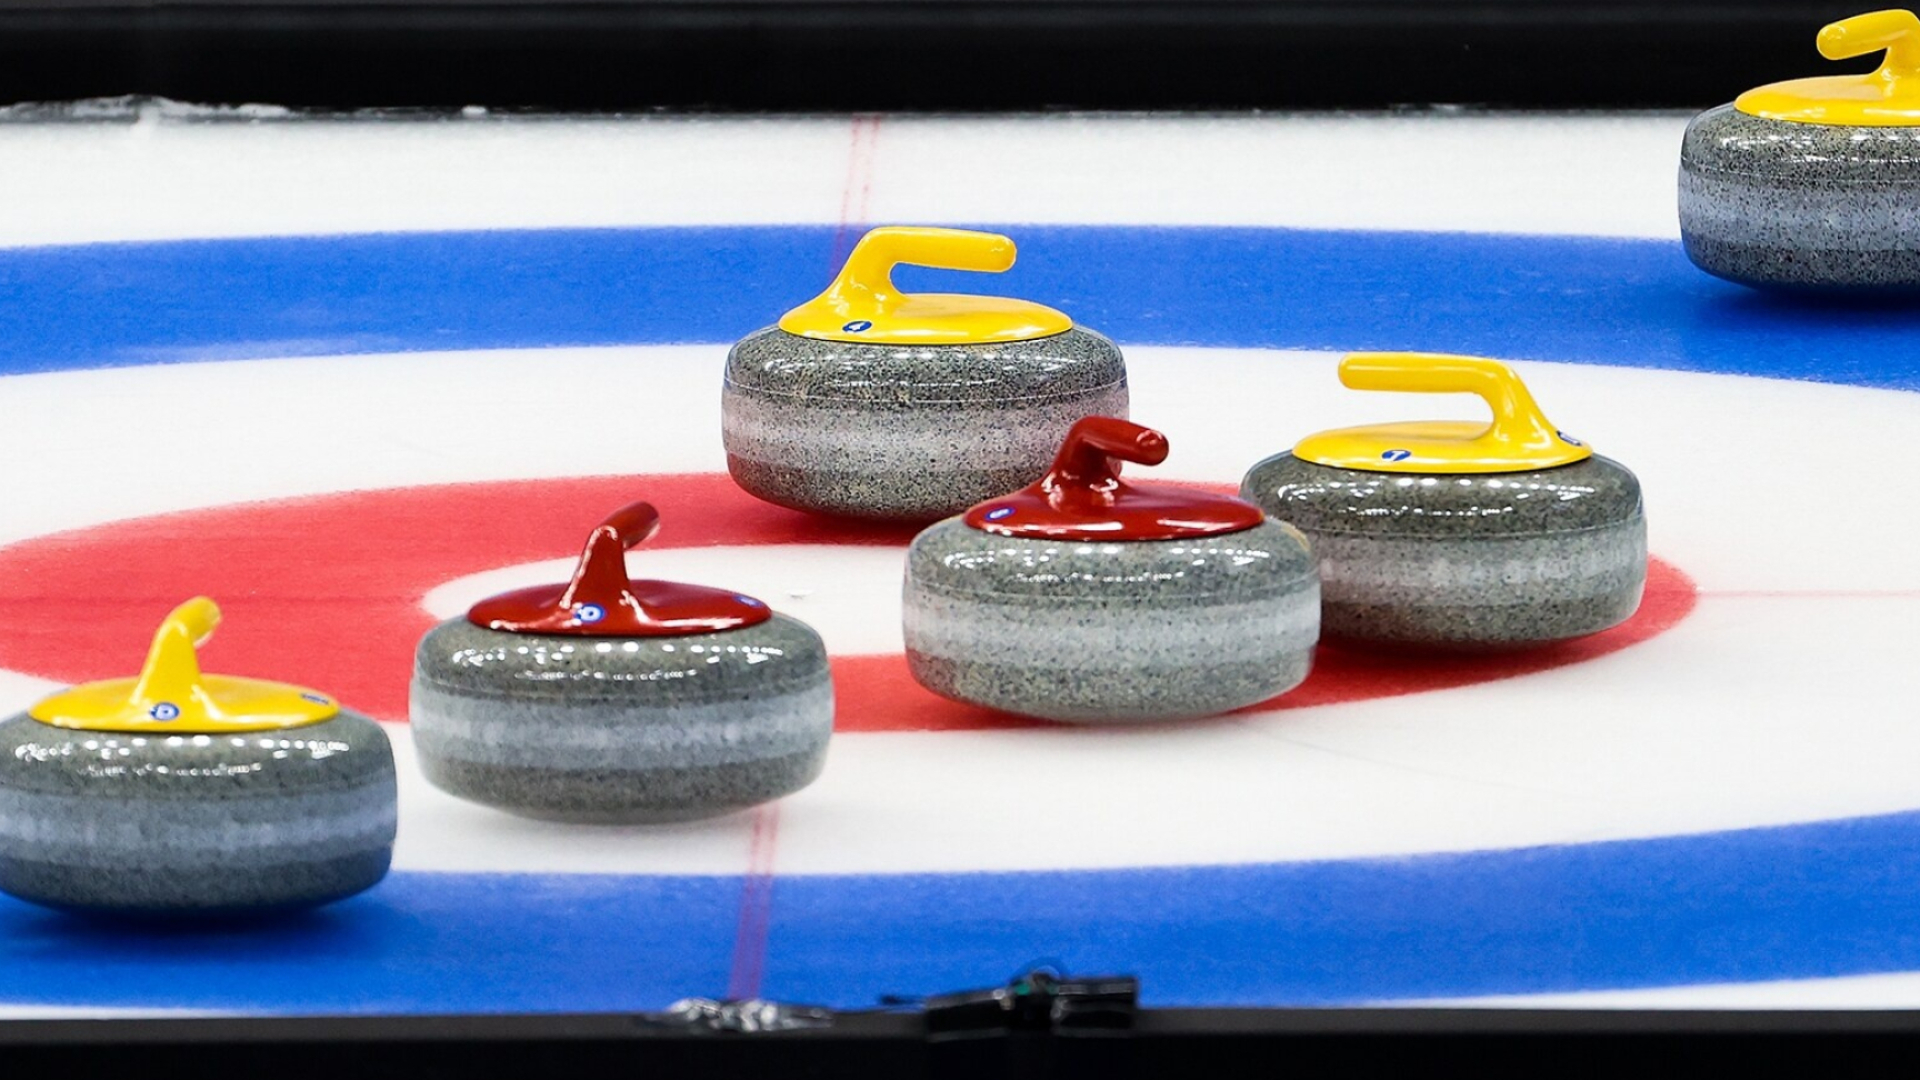 Curling: The rocks, Granite-made stones for an official Olympic winter sport. 1920x1080 Full HD Wallpaper.